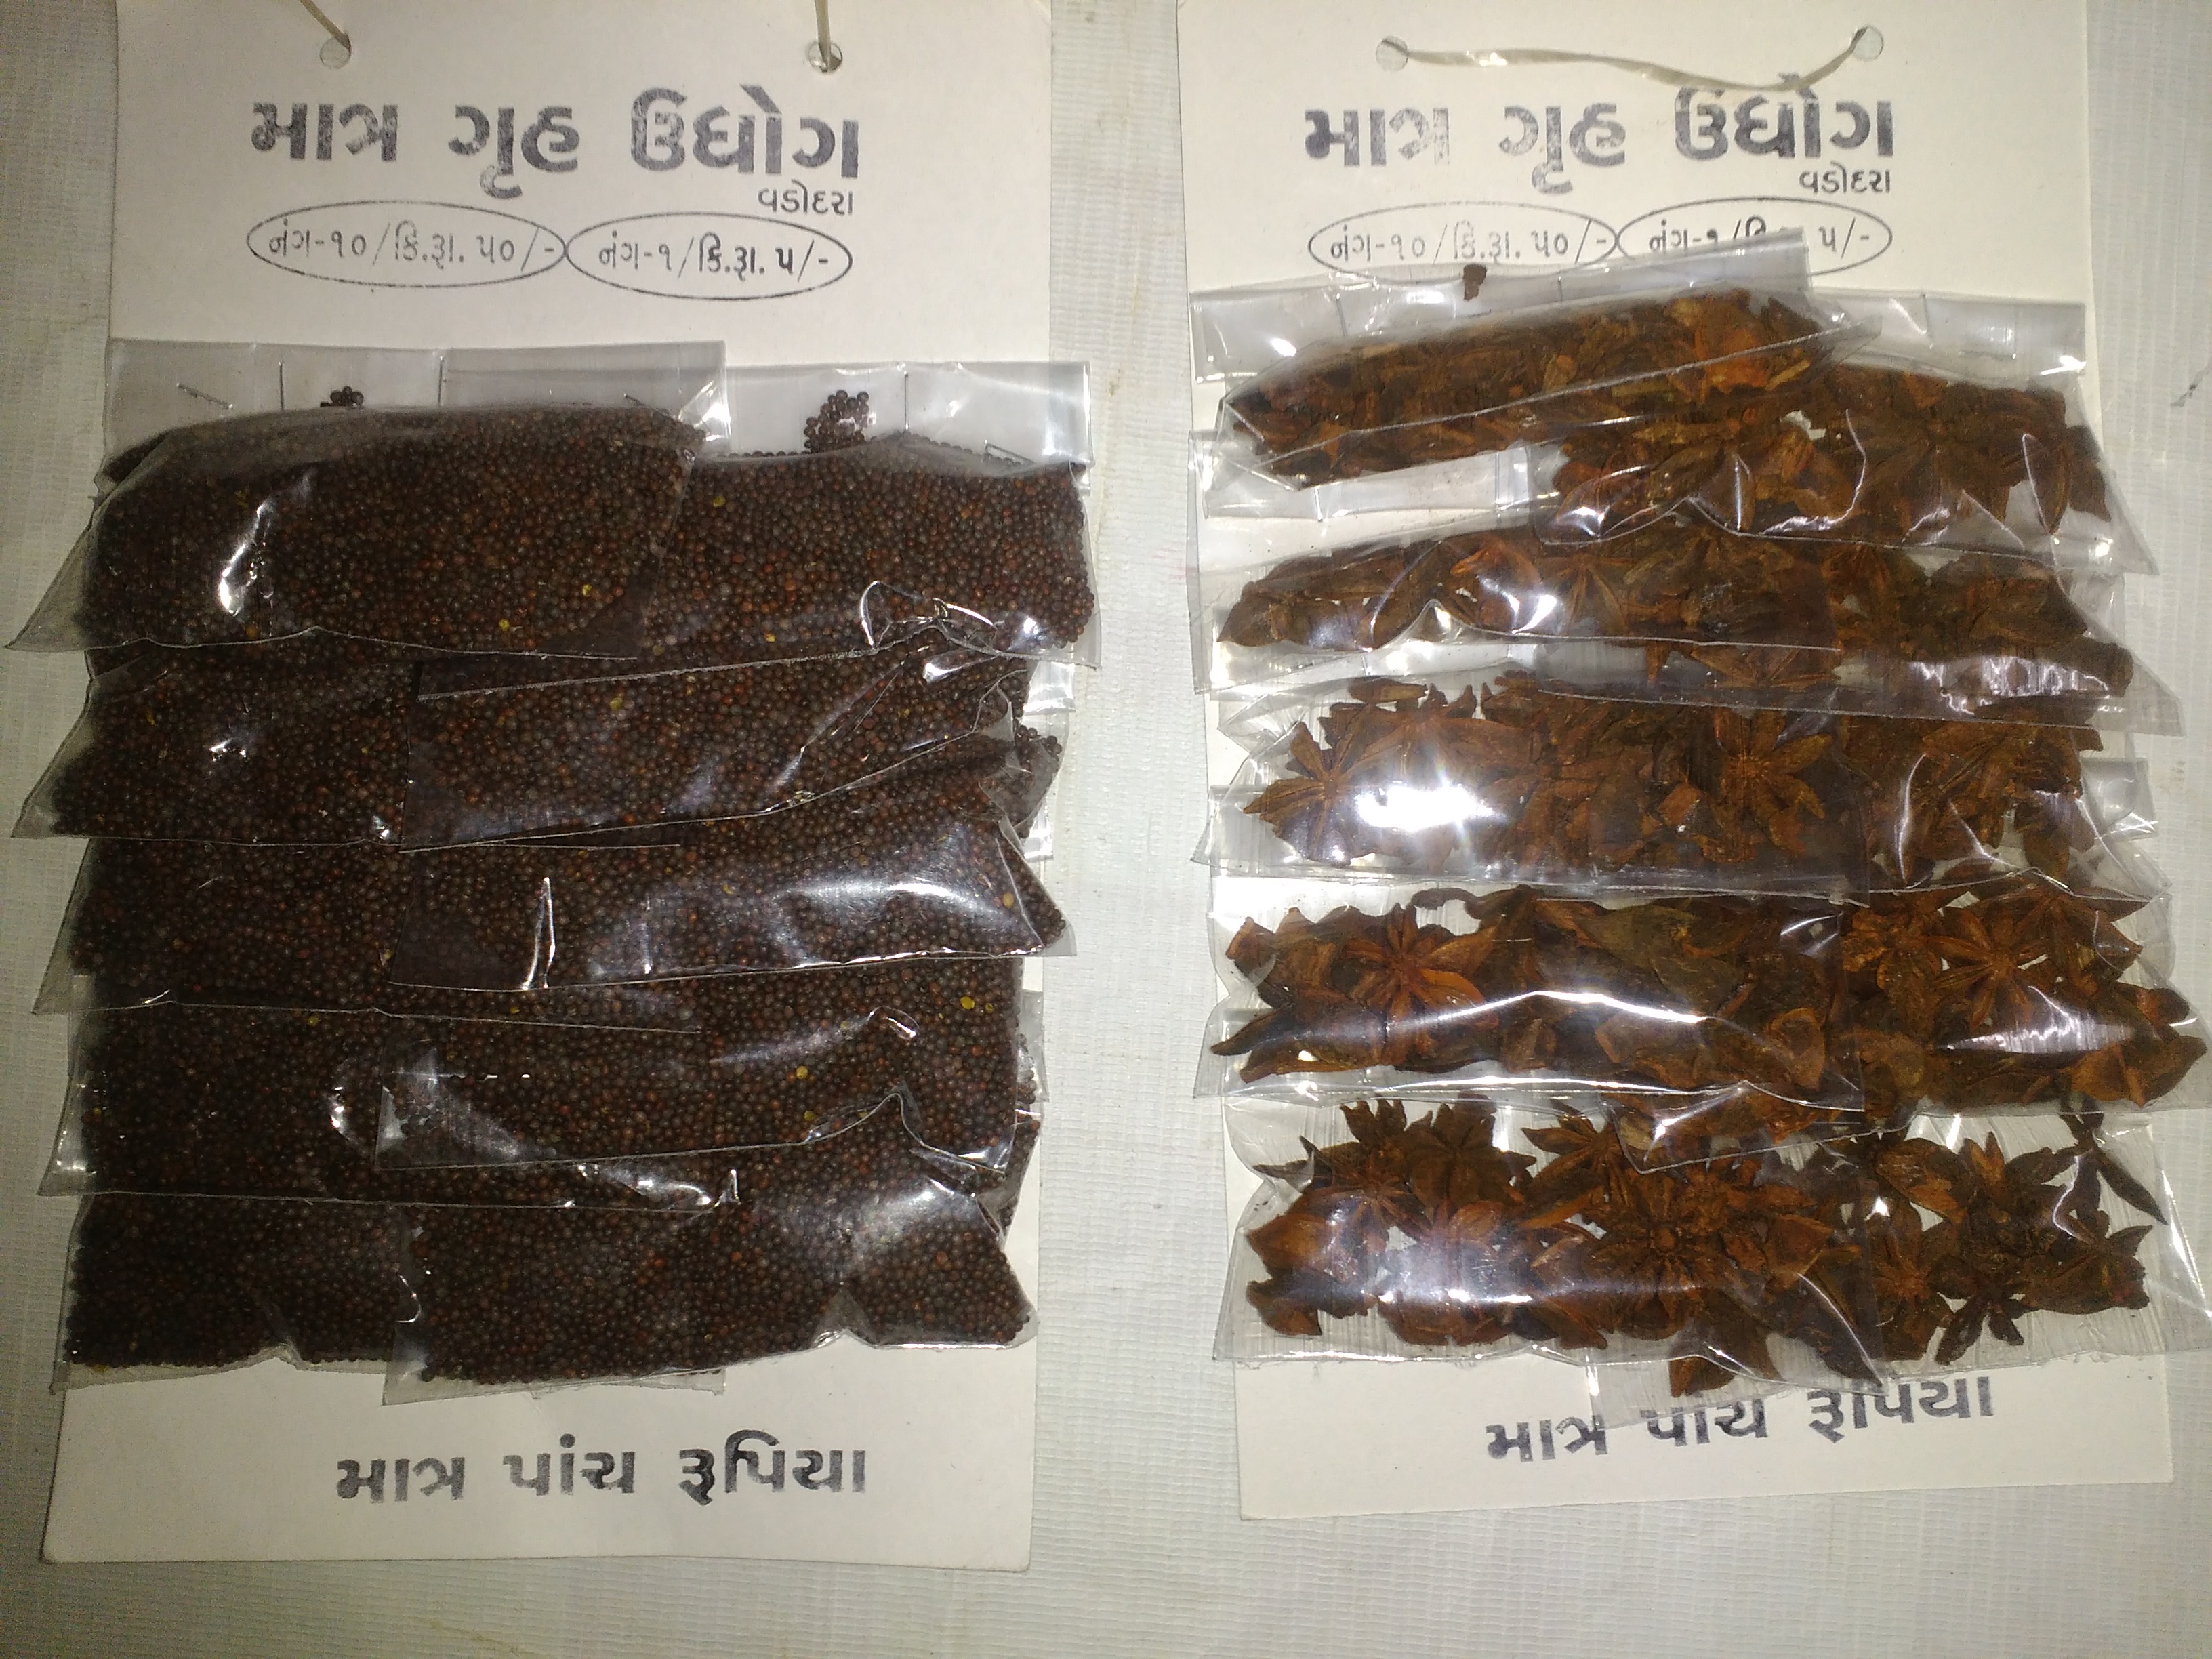 Wanted - Wholesalers of grocery items like Spices 